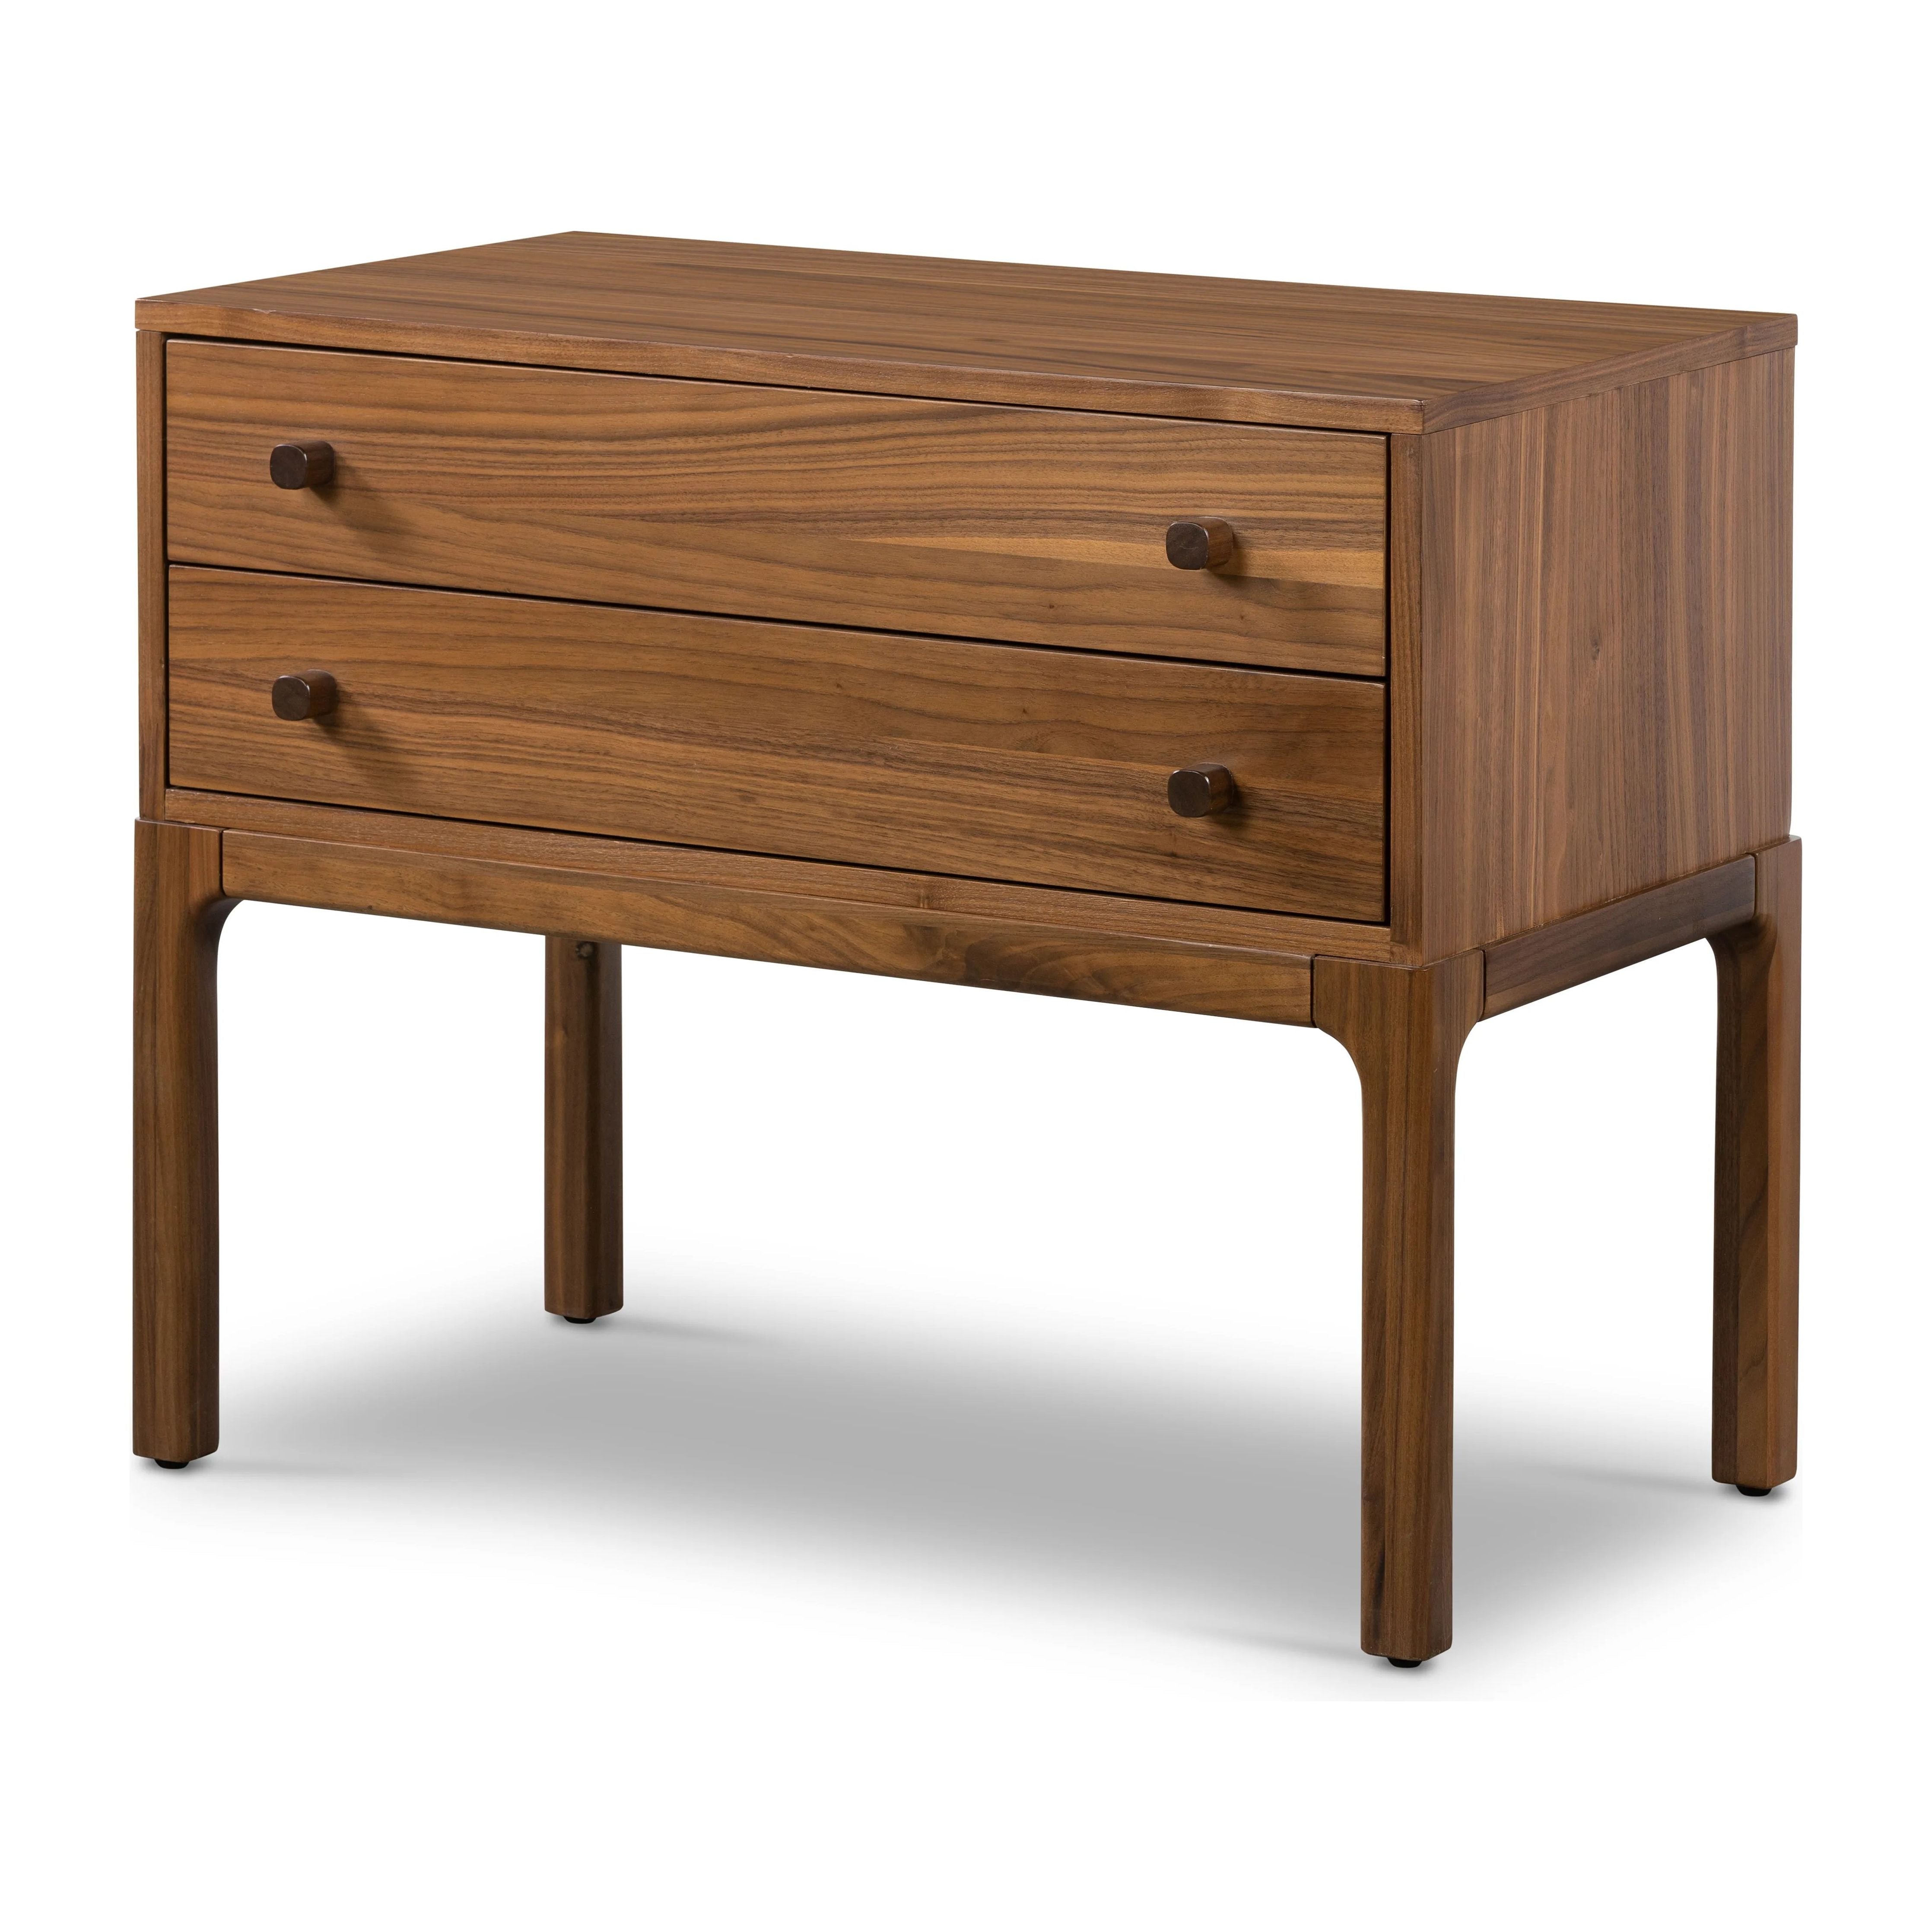 Inspired by campaign-style furniture of the 1800s â€” packable pieces first designed for traveling military use â€” a simply shaped nightstand of natural walnut features a subtly inset top and rounded legs, finished with wooden hardware Amethyst Home provides interior design, new home construction design consulting, vintage area rugs, and lighting in the Miami metro area.